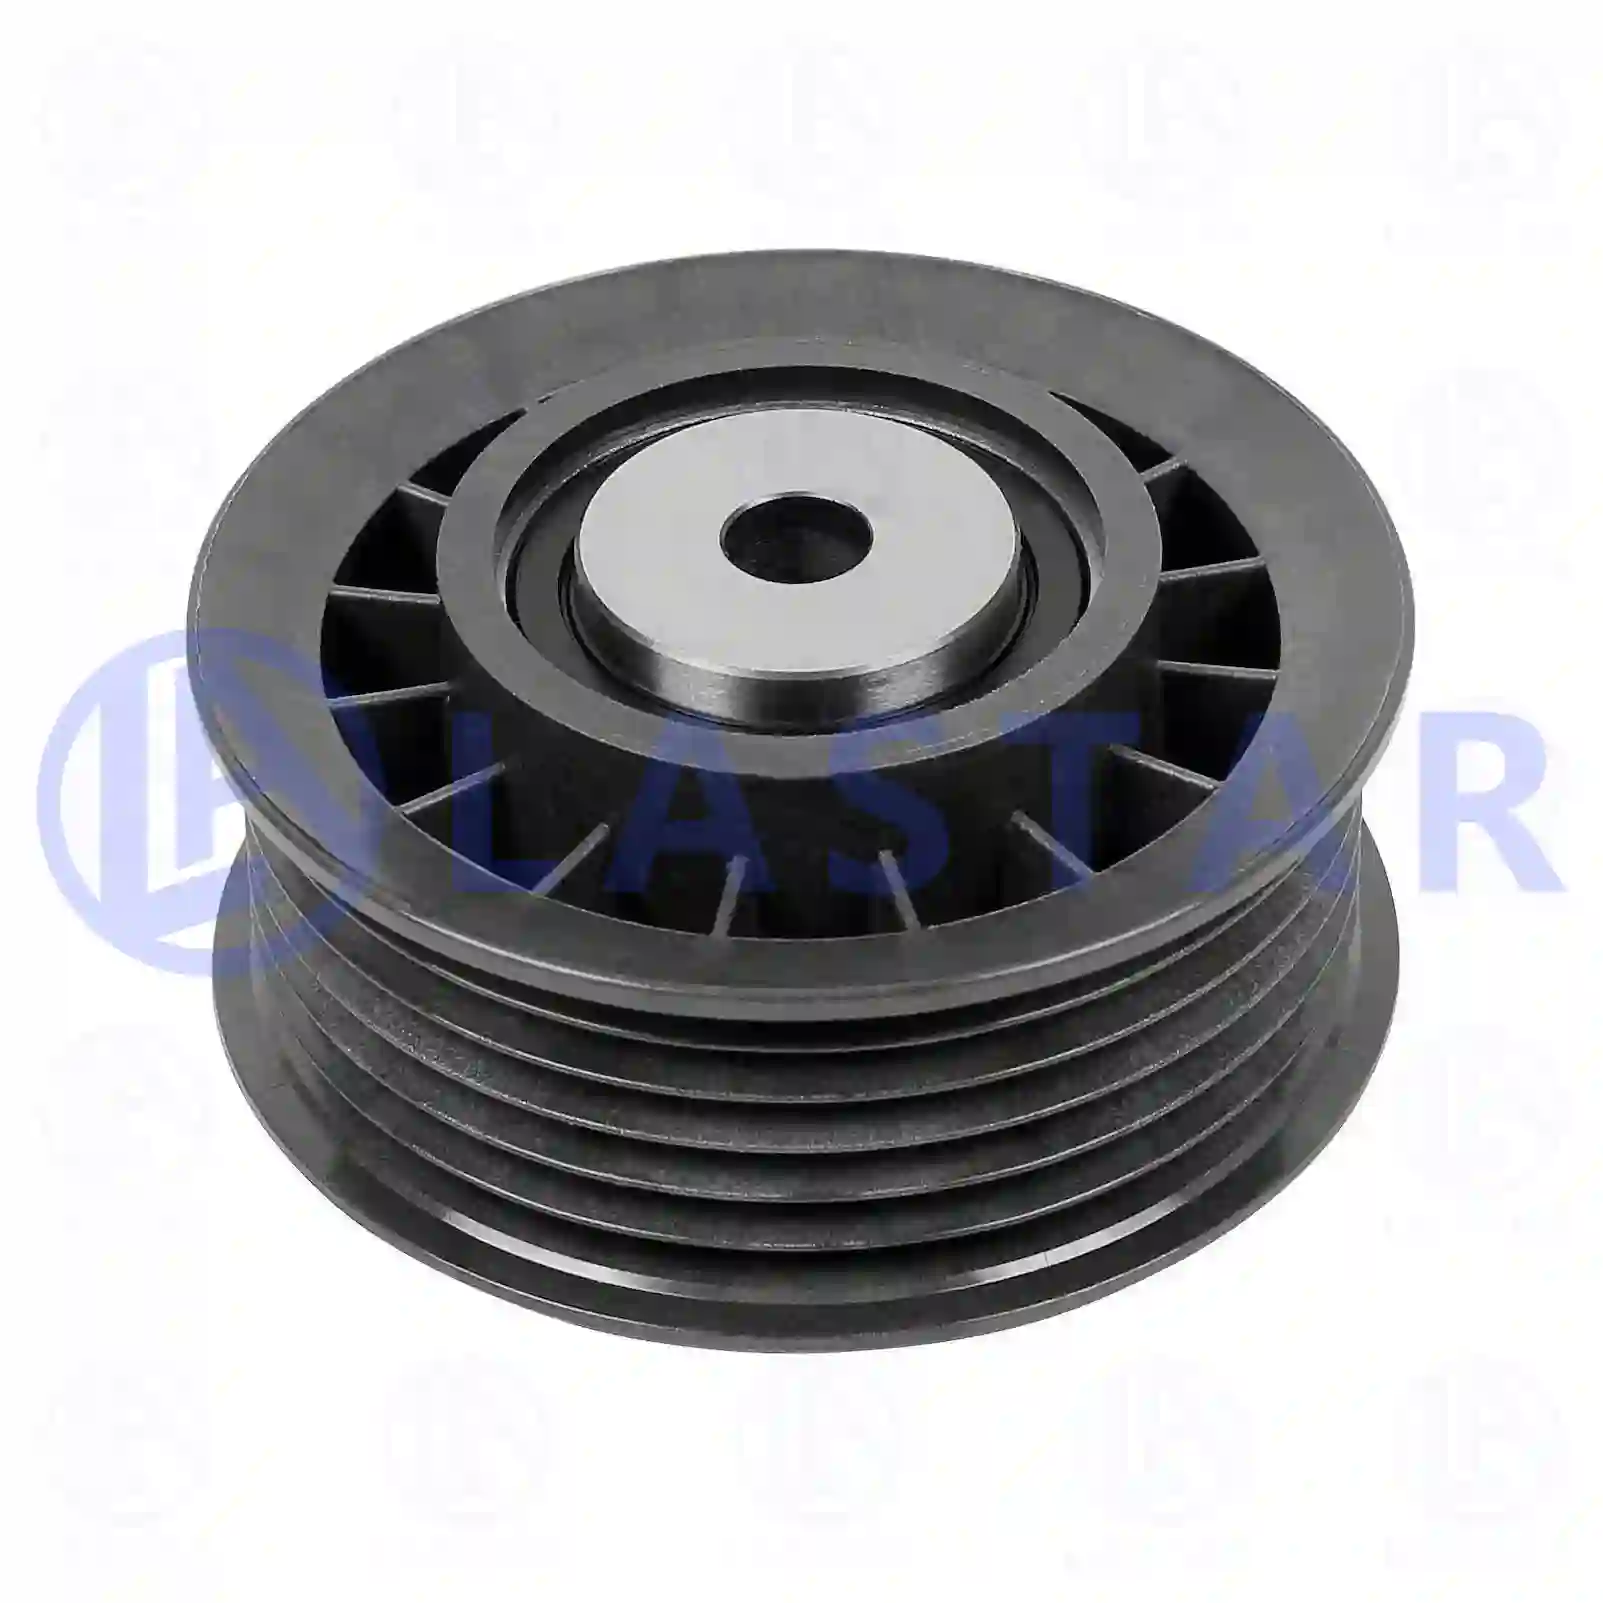 Tension roller, 77708080, 6012001070, , ||  77708080 Lastar Spare Part | Truck Spare Parts, Auotomotive Spare Parts Tension roller, 77708080, 6012001070, , ||  77708080 Lastar Spare Part | Truck Spare Parts, Auotomotive Spare Parts